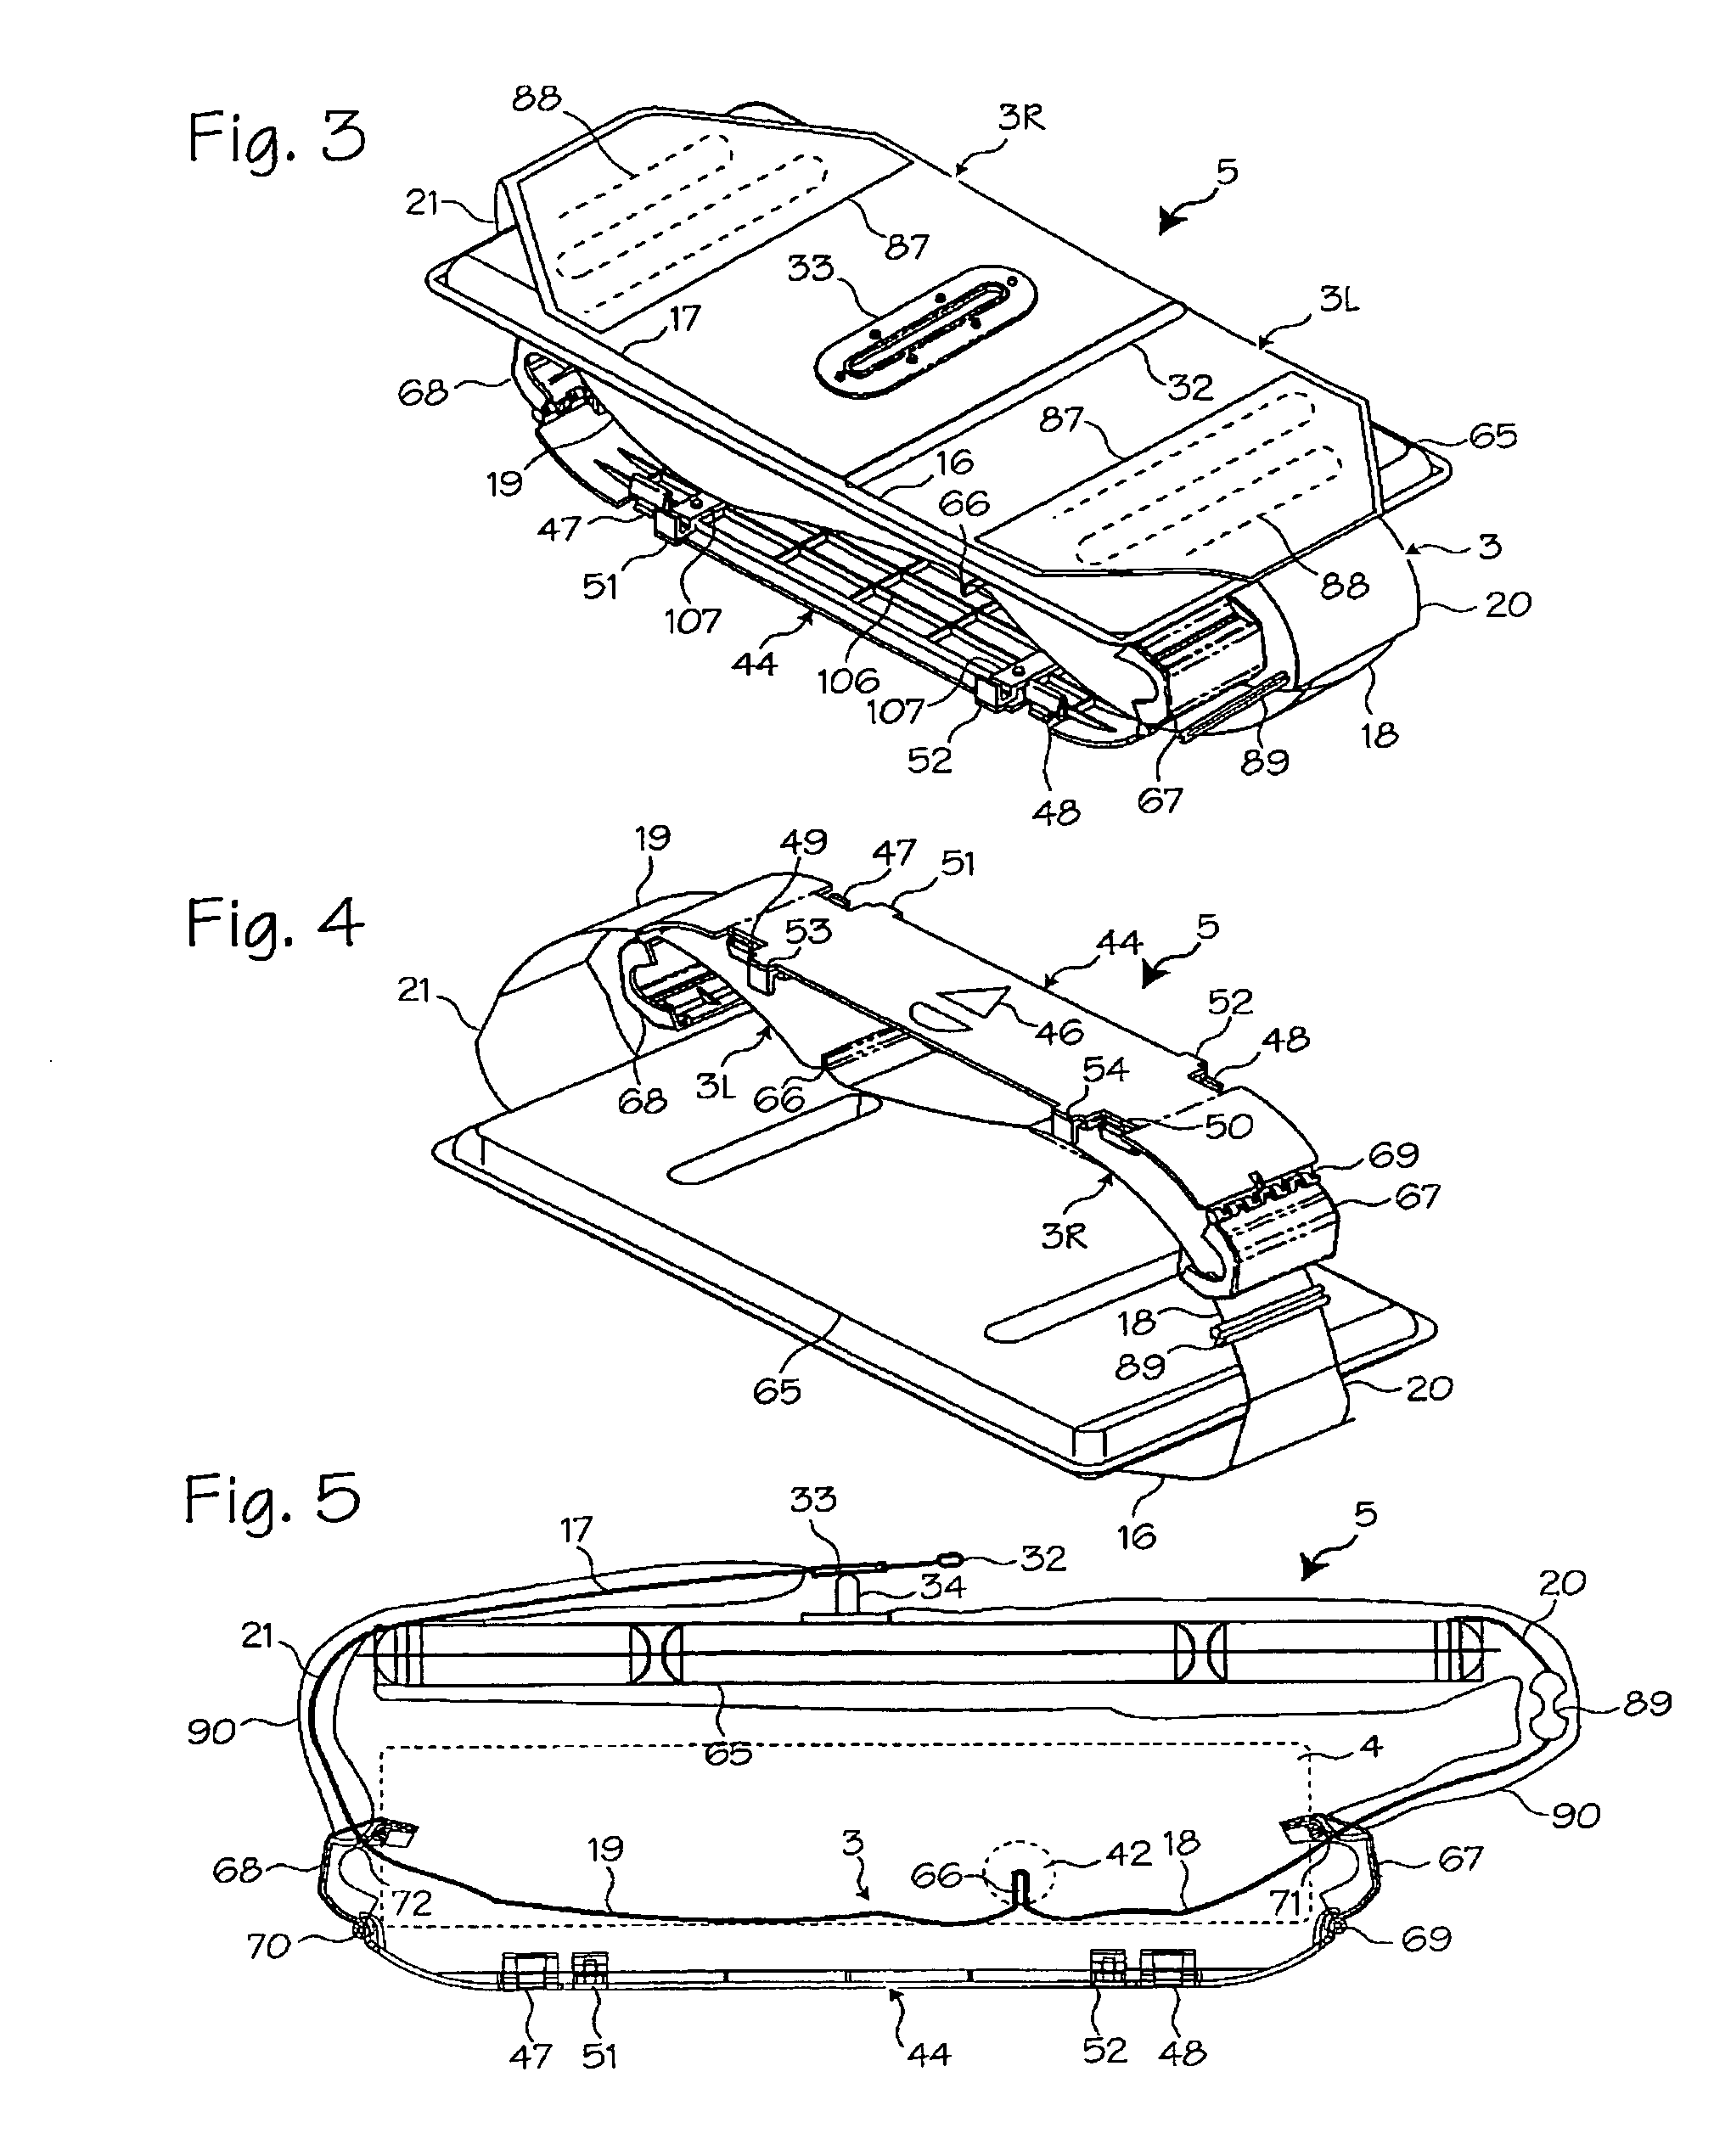 Compression belt system for use with chest compression devices